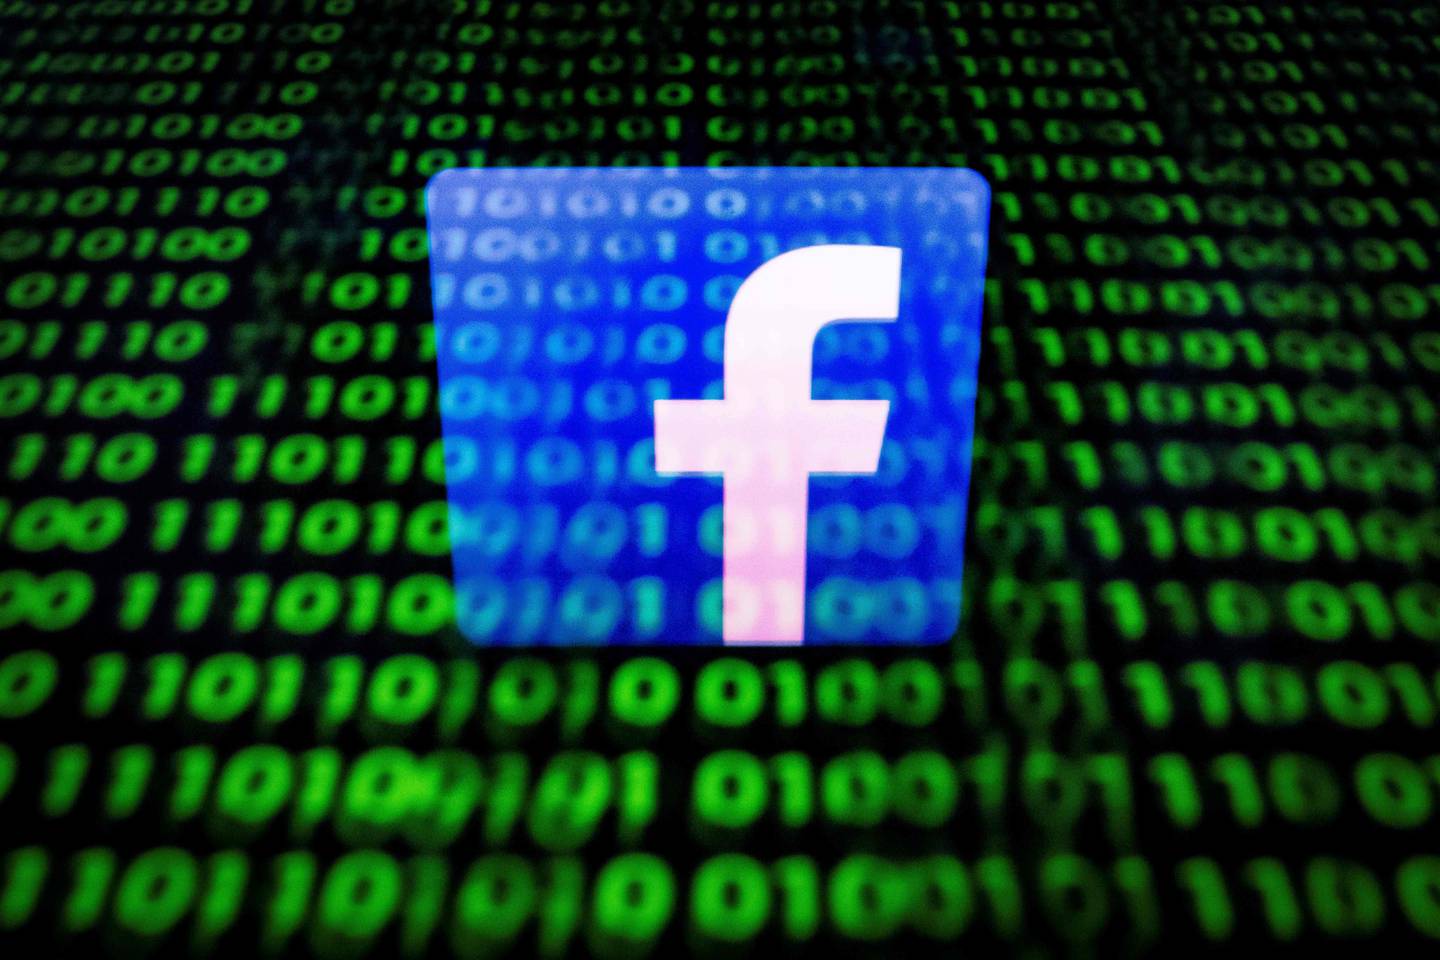 (FILES) In this file photo taken on April 26, 2018 in Paris shows the logo of social network Facebook displayed on a screen and reflected on a tablet. - Facebook announced it identified stealth misinformation campaigns from Russia and Iran and shut down hundreds of accounts as part of its battle against manipulation of its platform, prompting a fresh denial from Moscow on August 22, 2018. The social network said late Tuesday that it removed more than 650 pages, groups and accounts identified as "networks of accounts misleading people about what they were doing," according to chief executive Mark Zuckerberg. (Photo by Lionel BONAVENTURE / AFP)